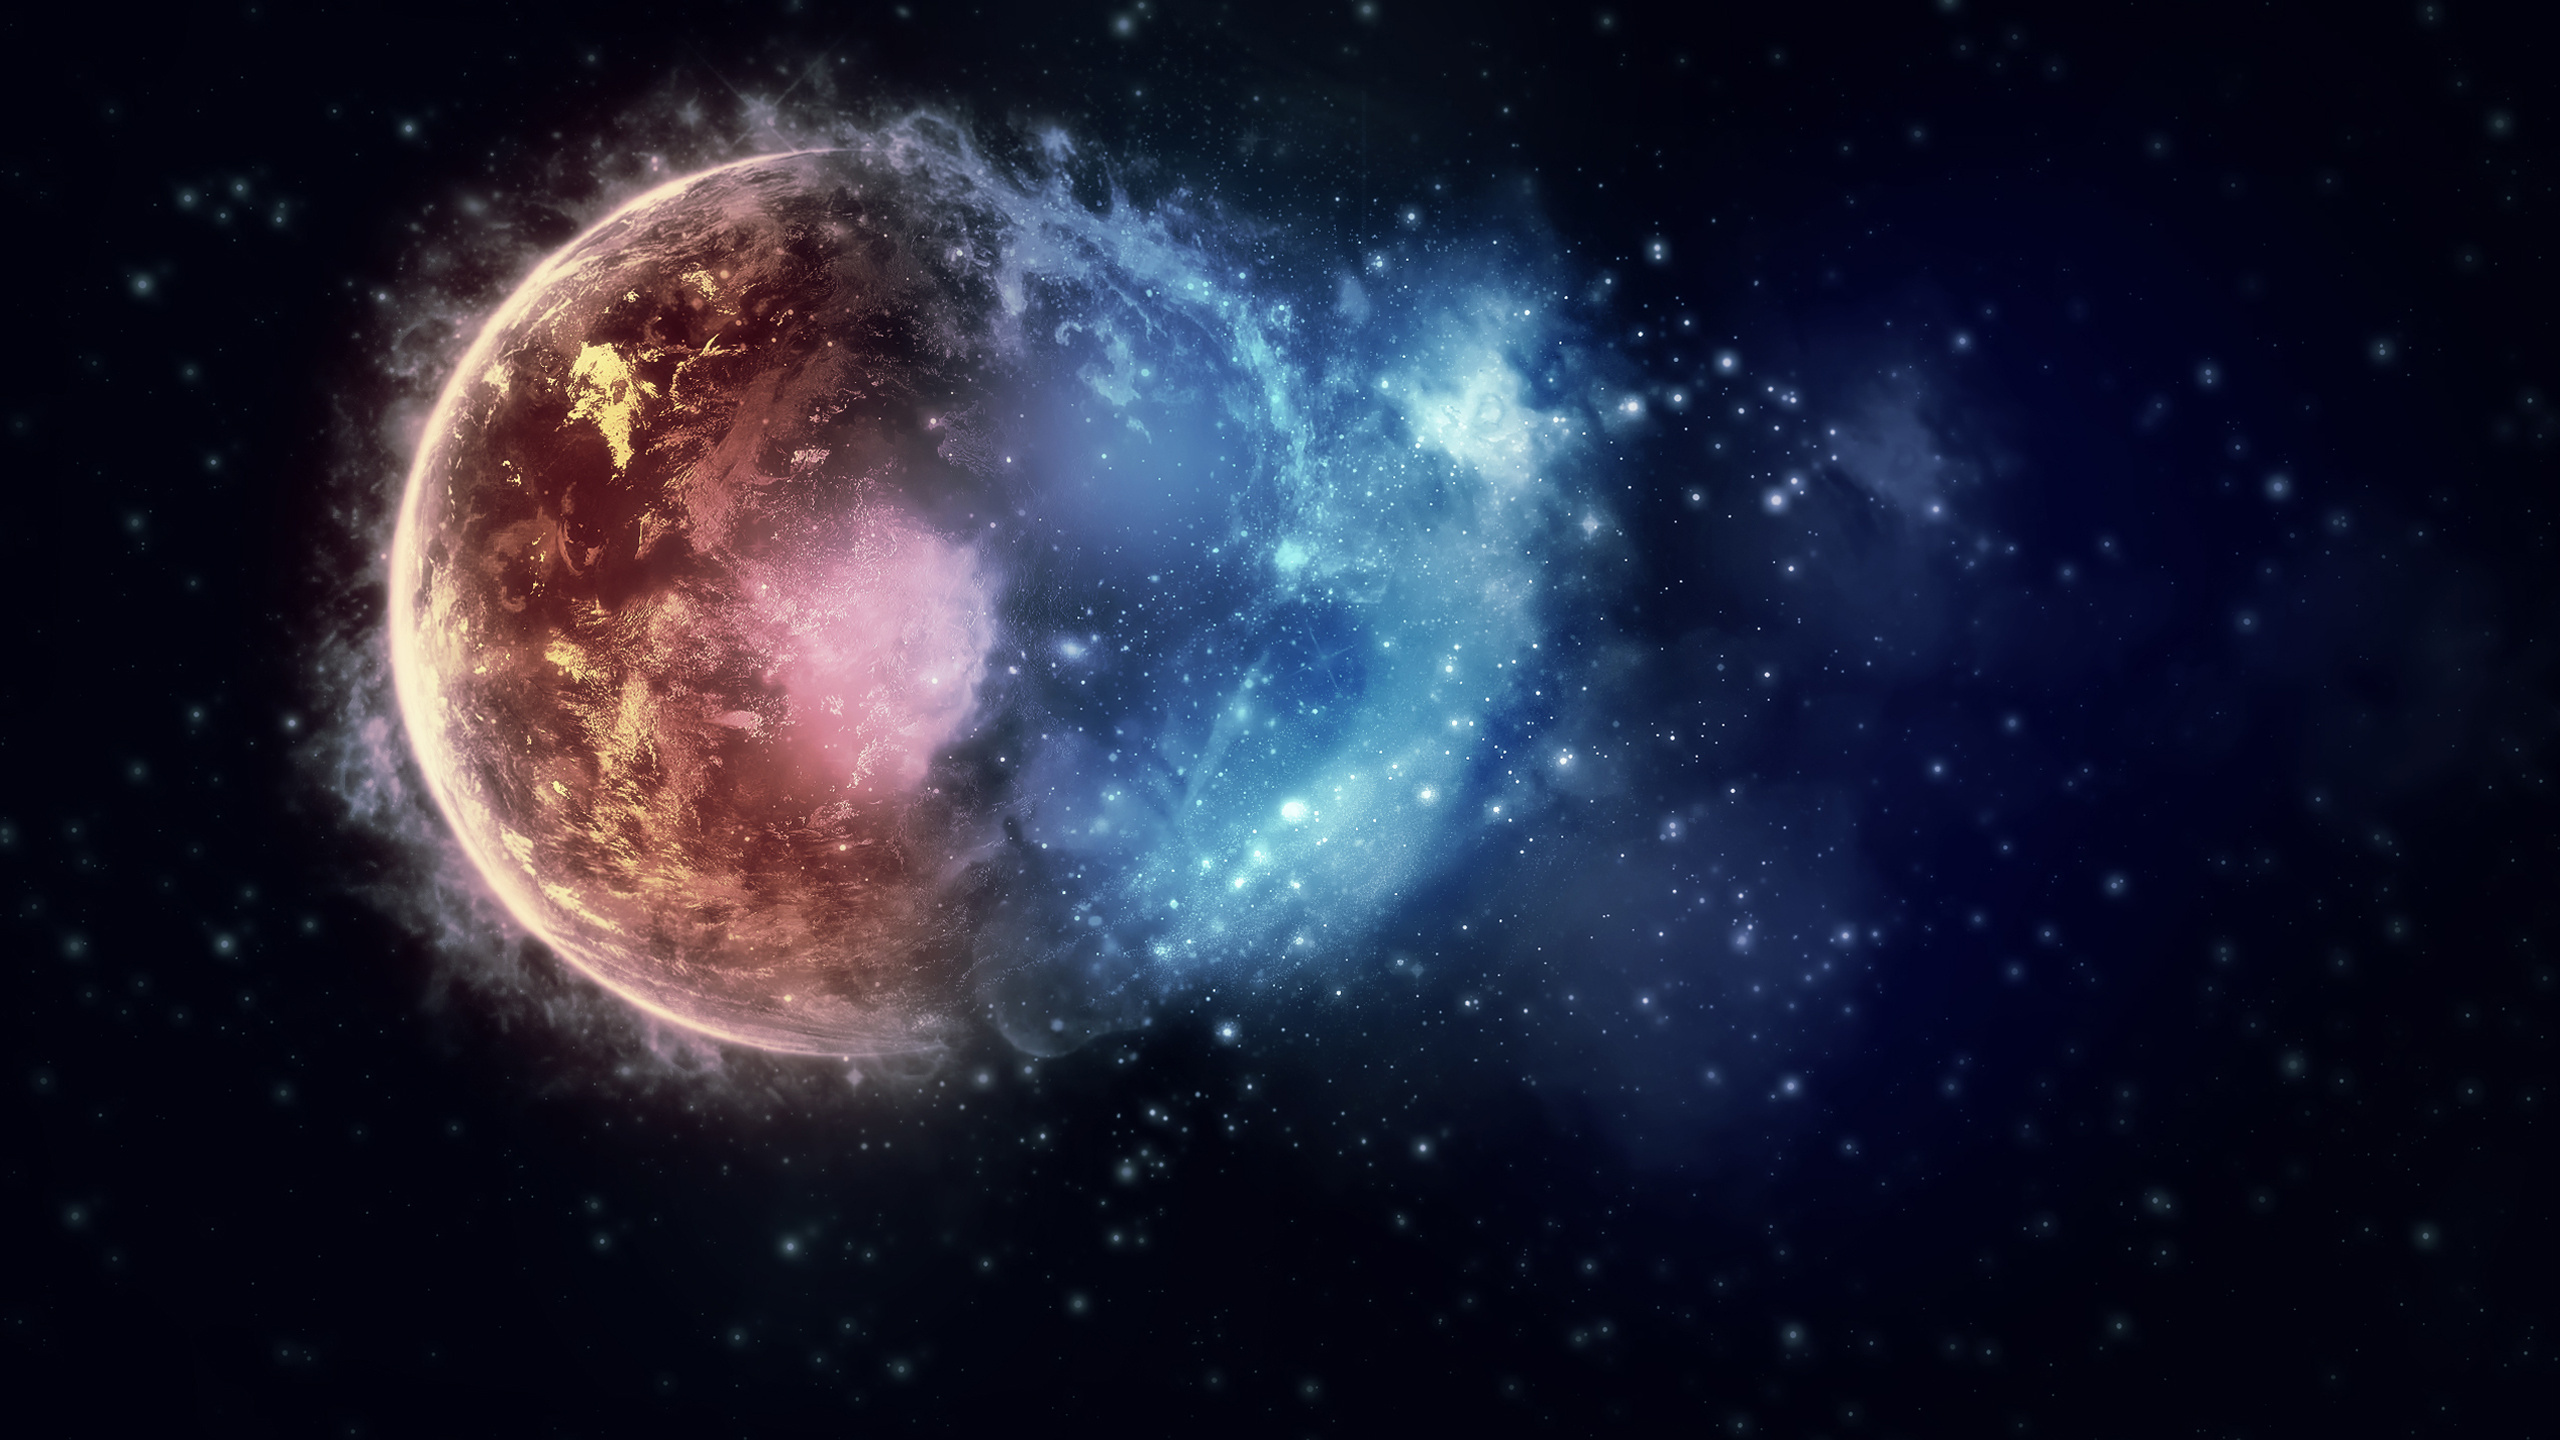 Cool planet backgrounds